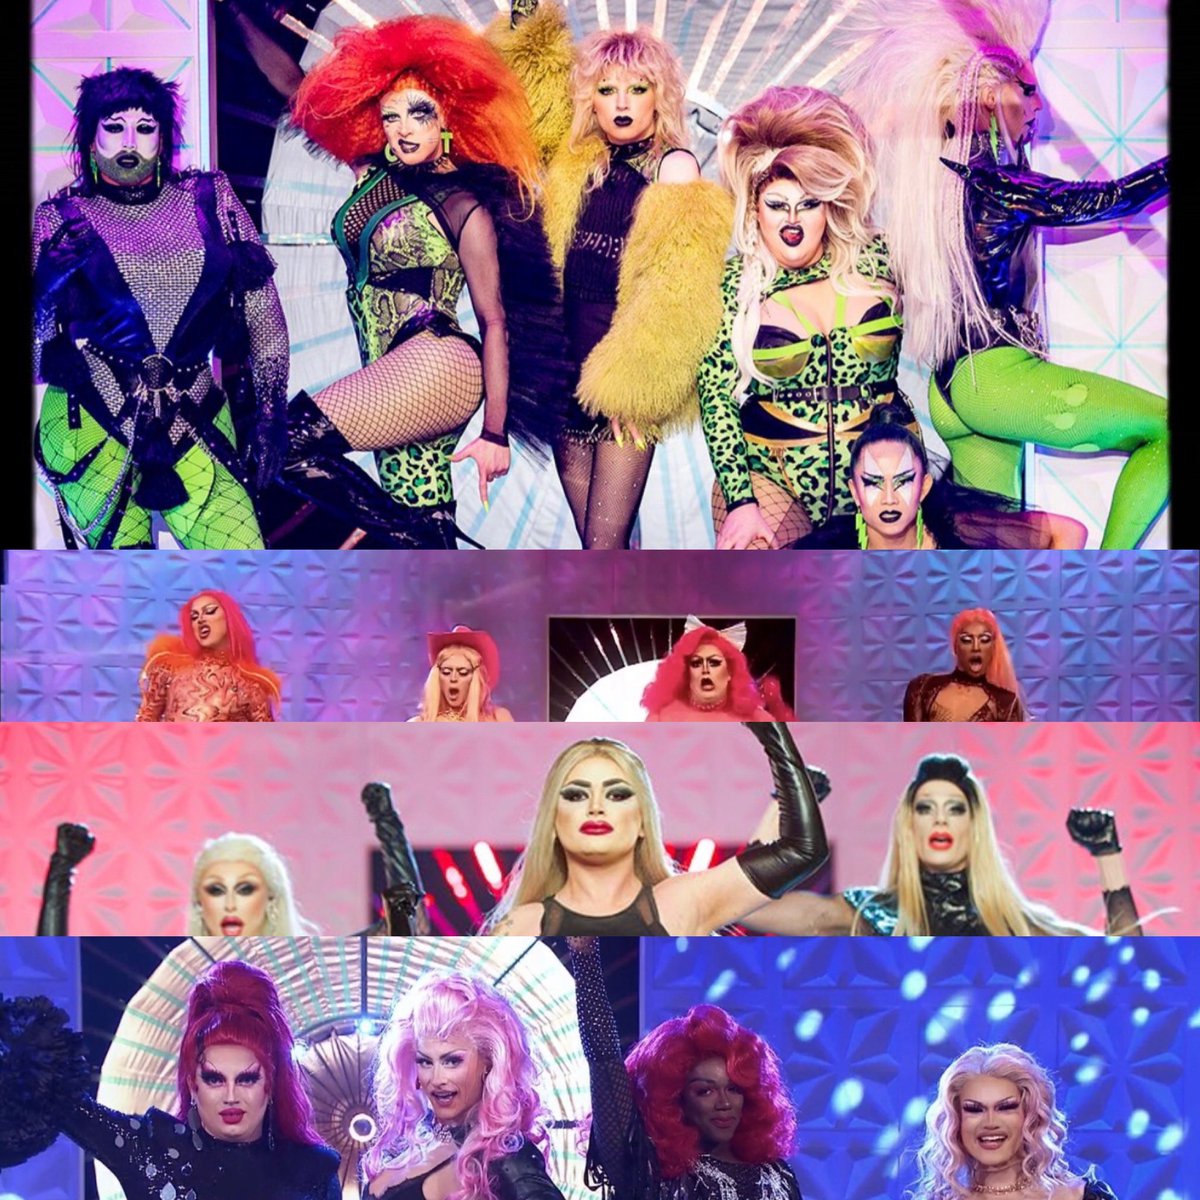 The incredible queens of the girl groups!!! @Divinadecampo #bagachipz @BluHydrangea_ #awhora @ShadyLawrence @its_tayce @biminibabes @EllaVaday @chorizamay @river_medway @ItsVanityMilan @PolitePixie @iamLeFil @dakota_schiffer @CheddarGorgeous @CopperToppQueen @thedannybeard